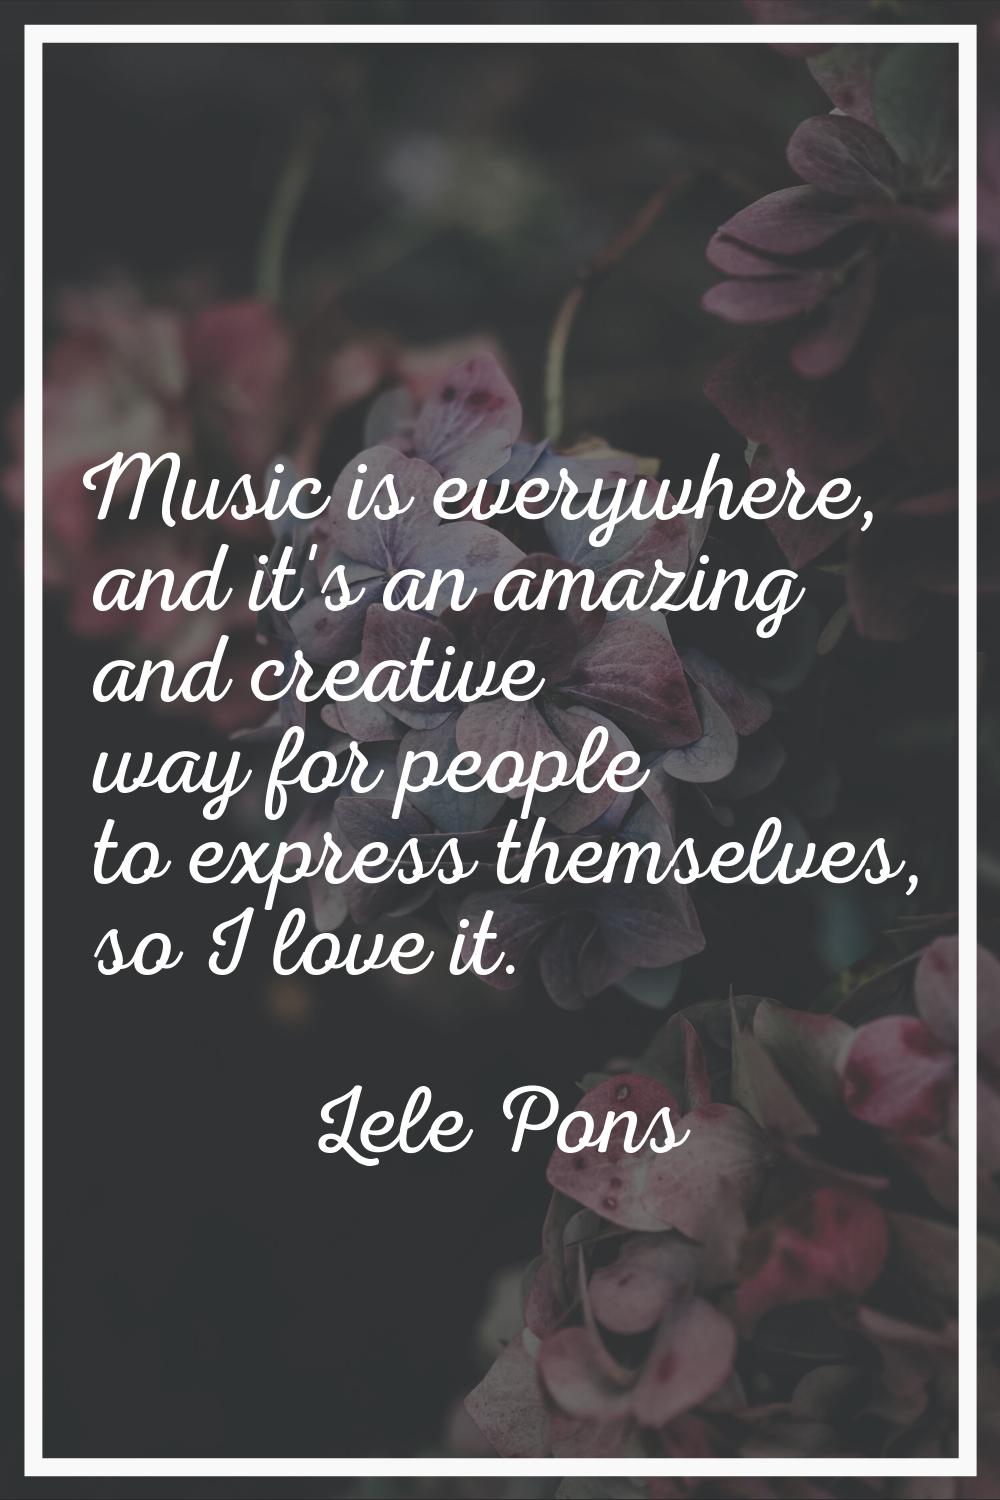 Music is everywhere, and it's an amazing and creative way for people to express themselves, so I lo